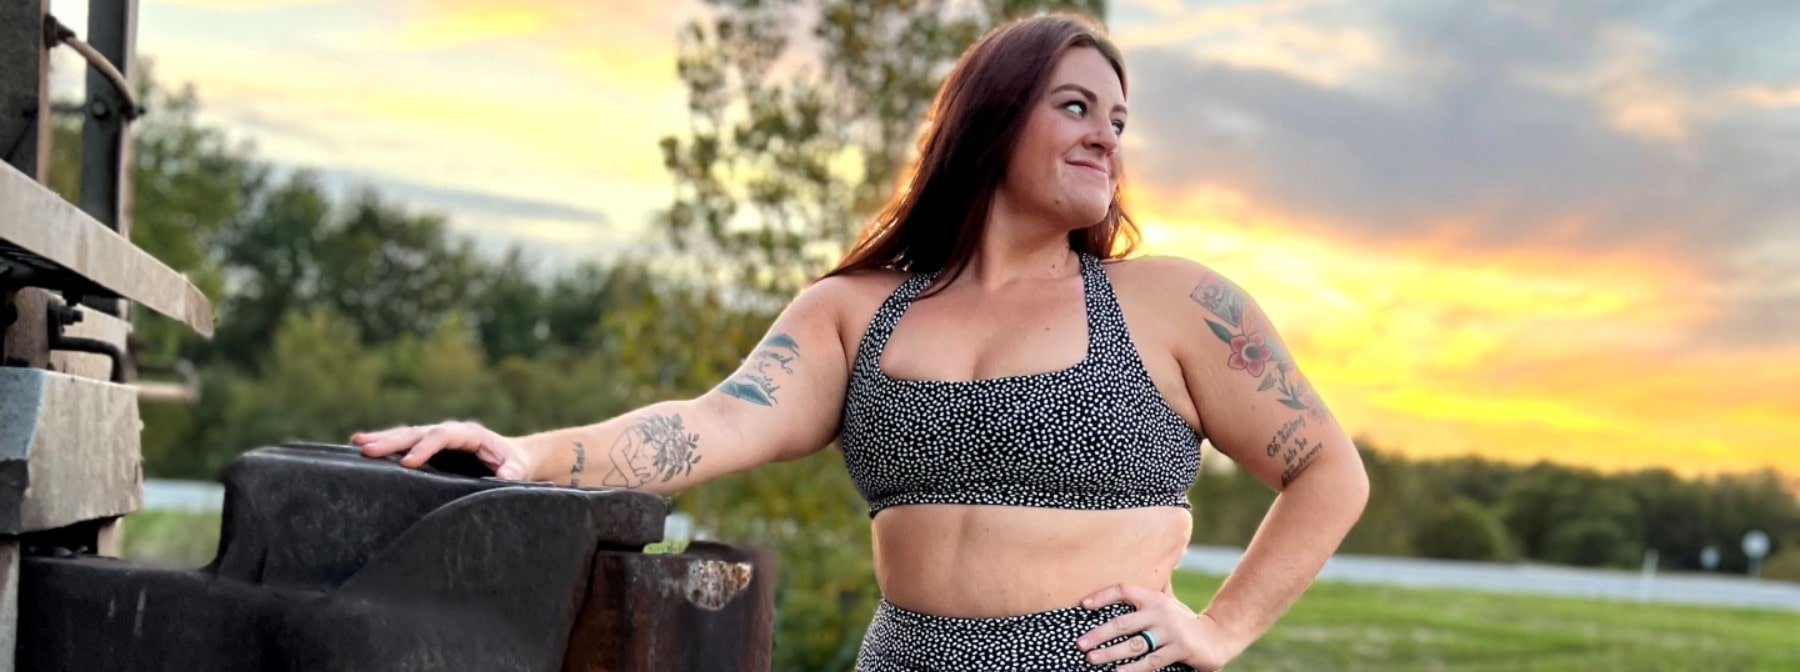 ‘I Didn’t Need To Change My Body To Be Worthy Of It’ | Exercising Self-Love With Jensofit